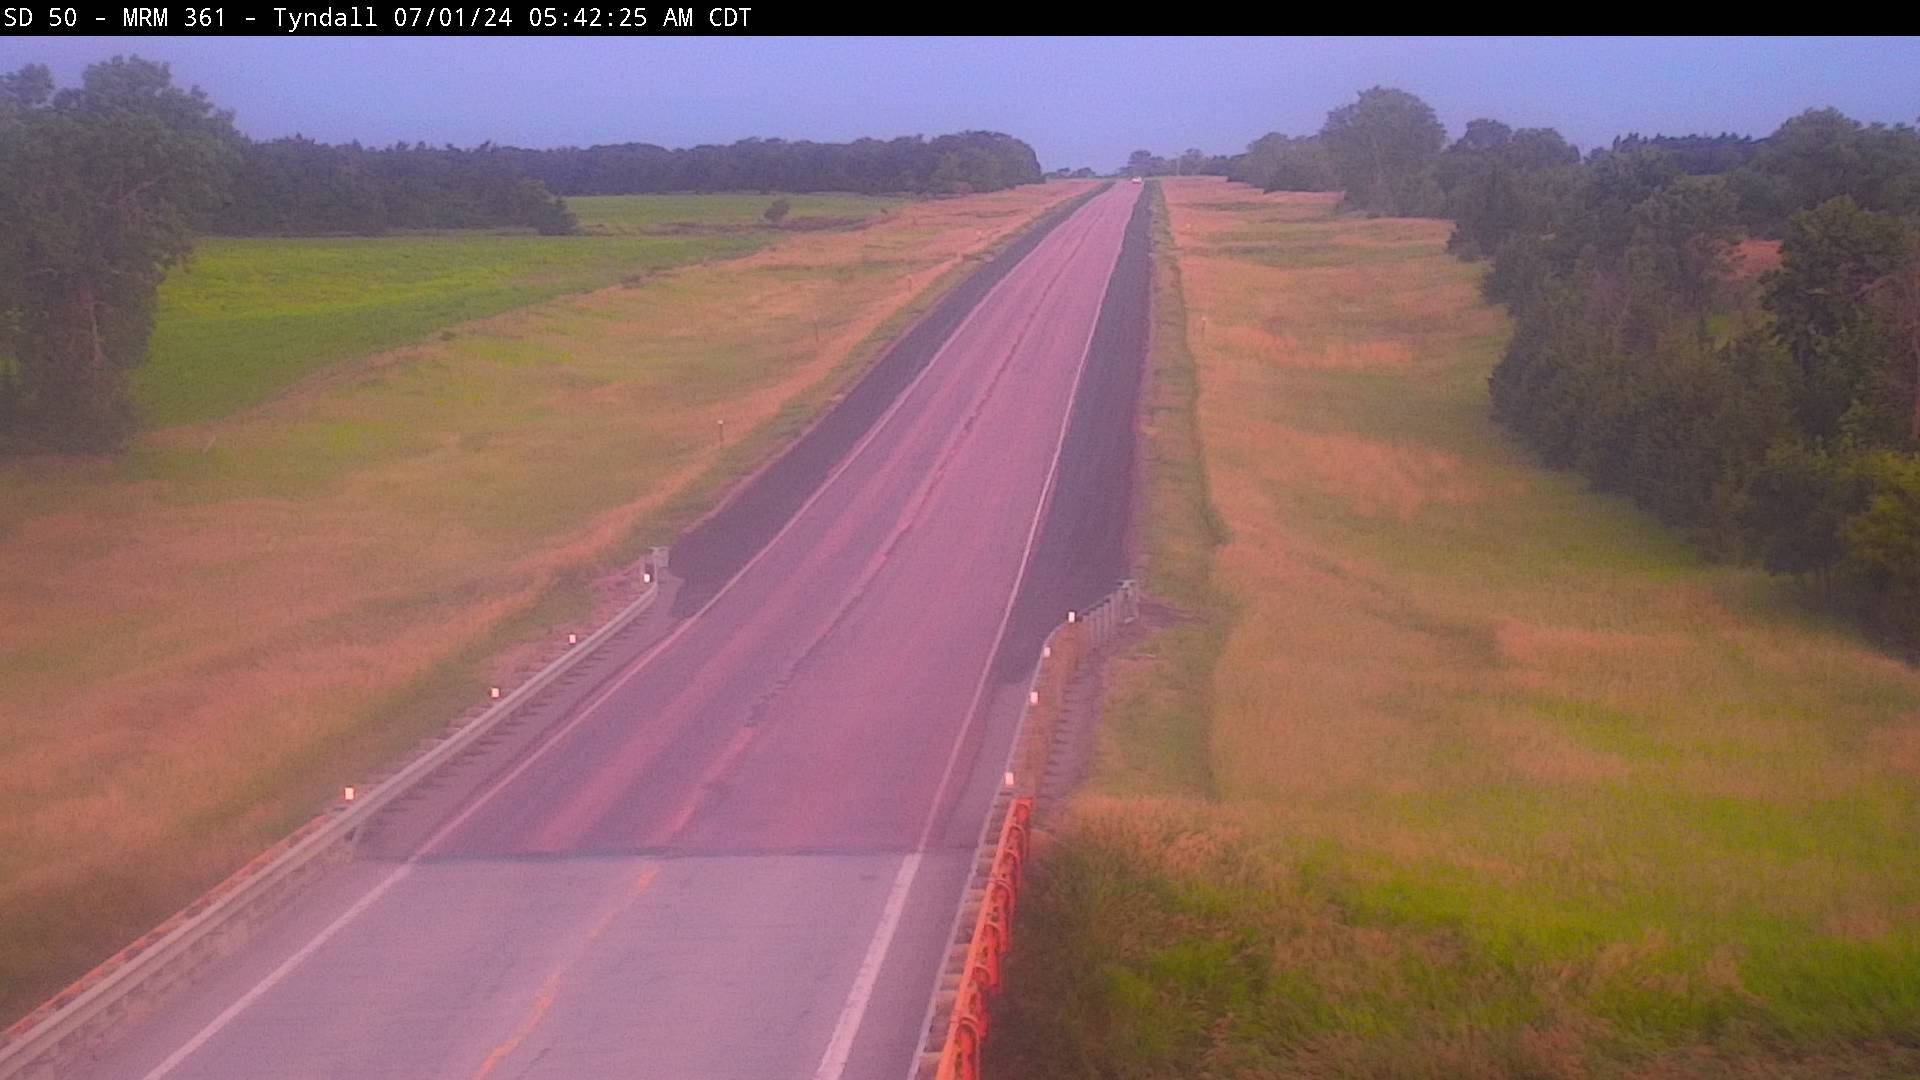 Traffic Cam 5 miles east of town along SD-50 @ MP 361 - West Player